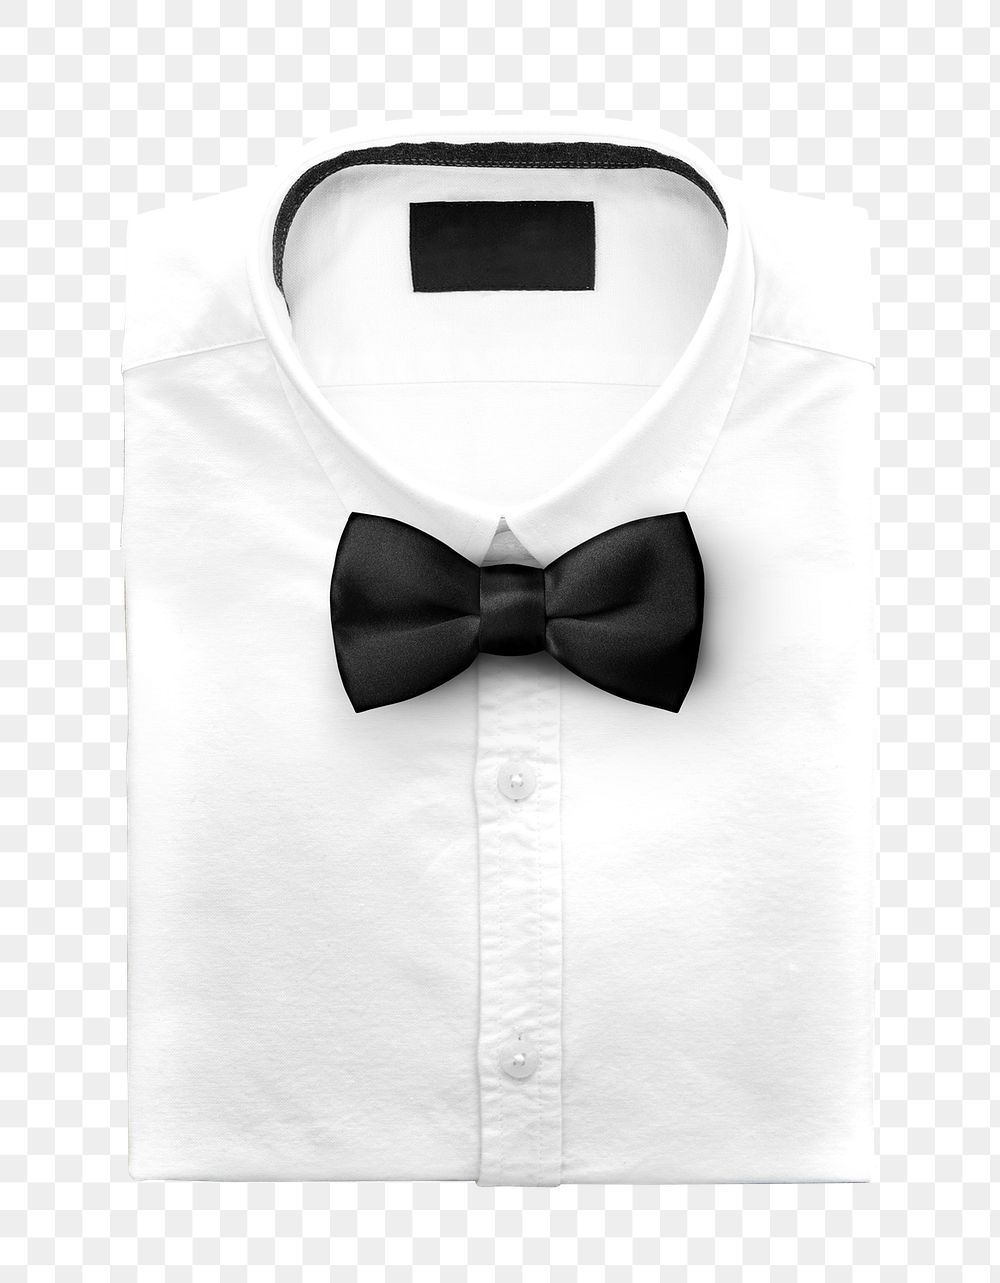 Shirt and bow tie png on transparent background, men&rsquo;s formal outfit accessory 